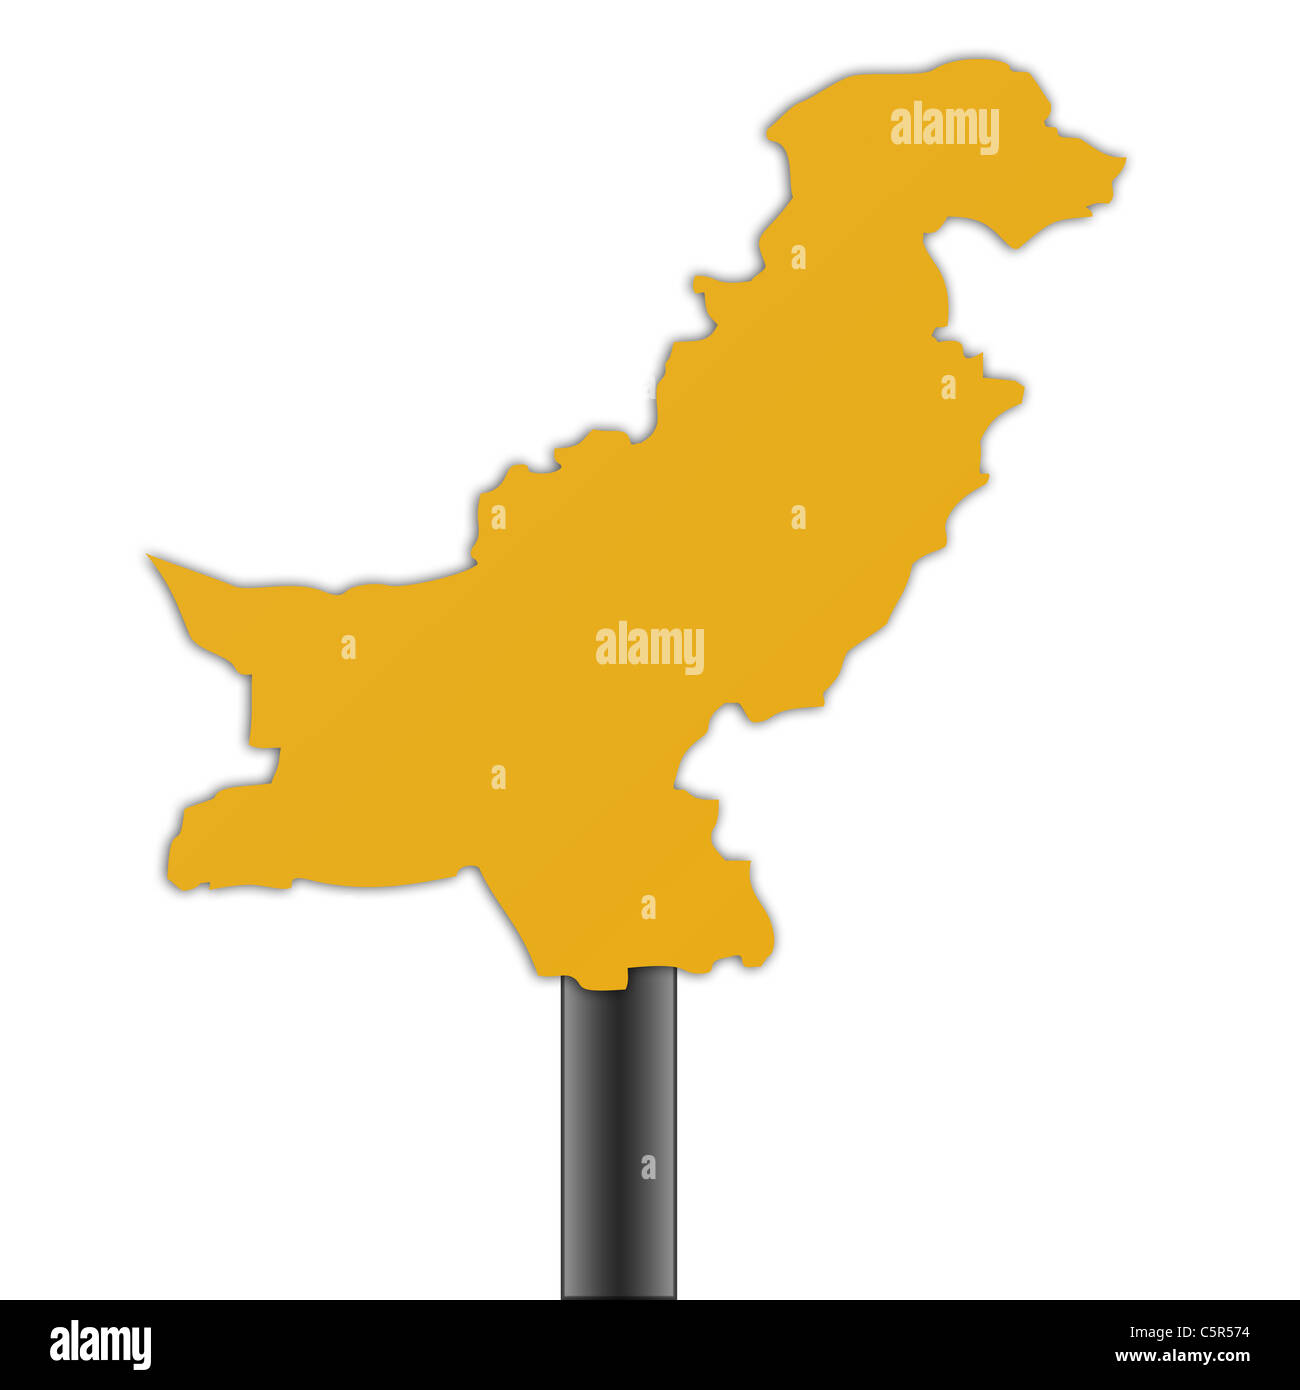 Pakistan map road sign isolated on a white background. Stock Photo